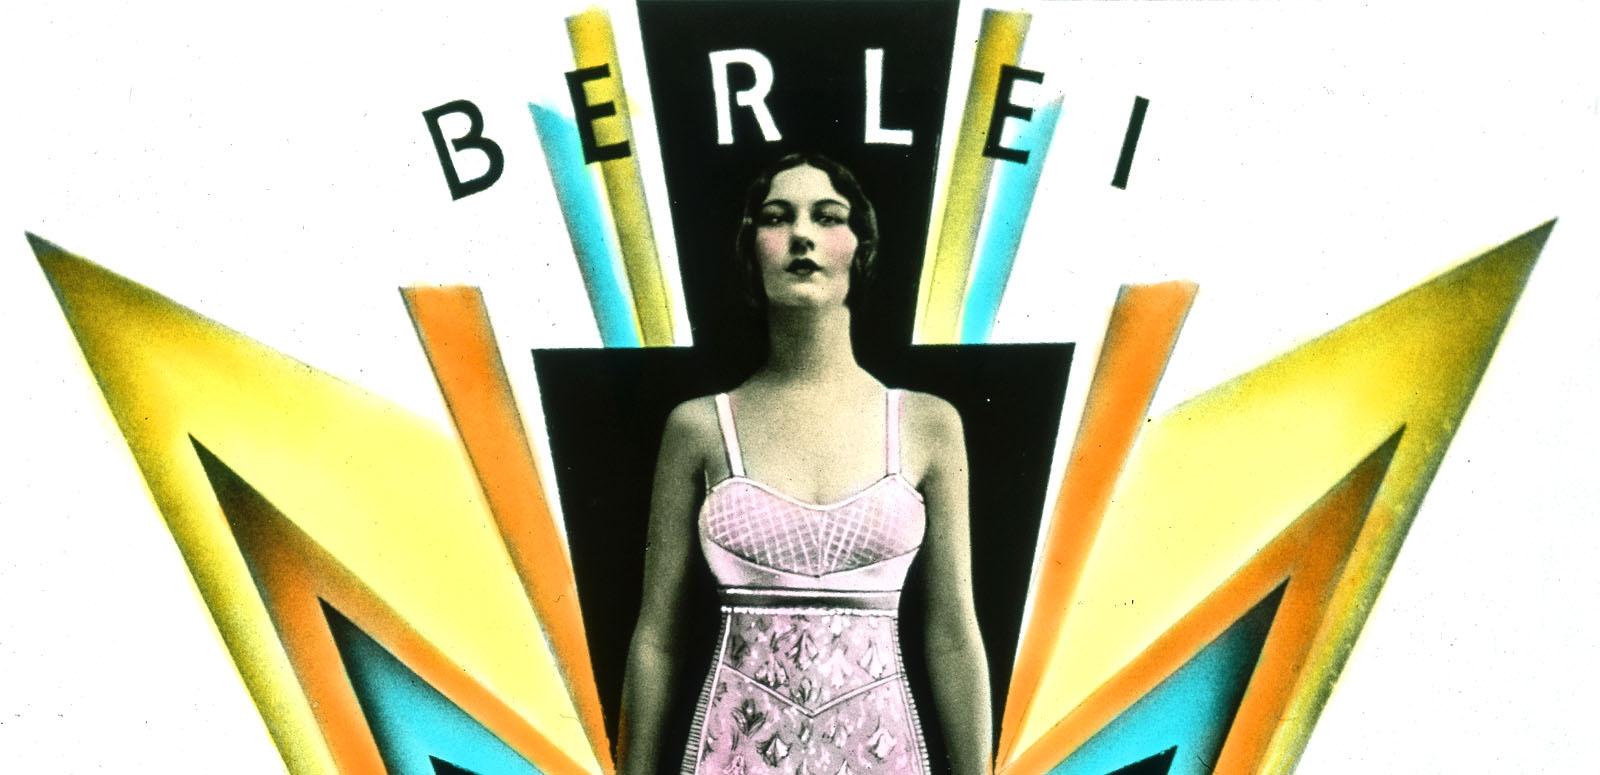 A woman wearing a pink foundation garment stands amidst art deco design elements suggesting power and lightening.